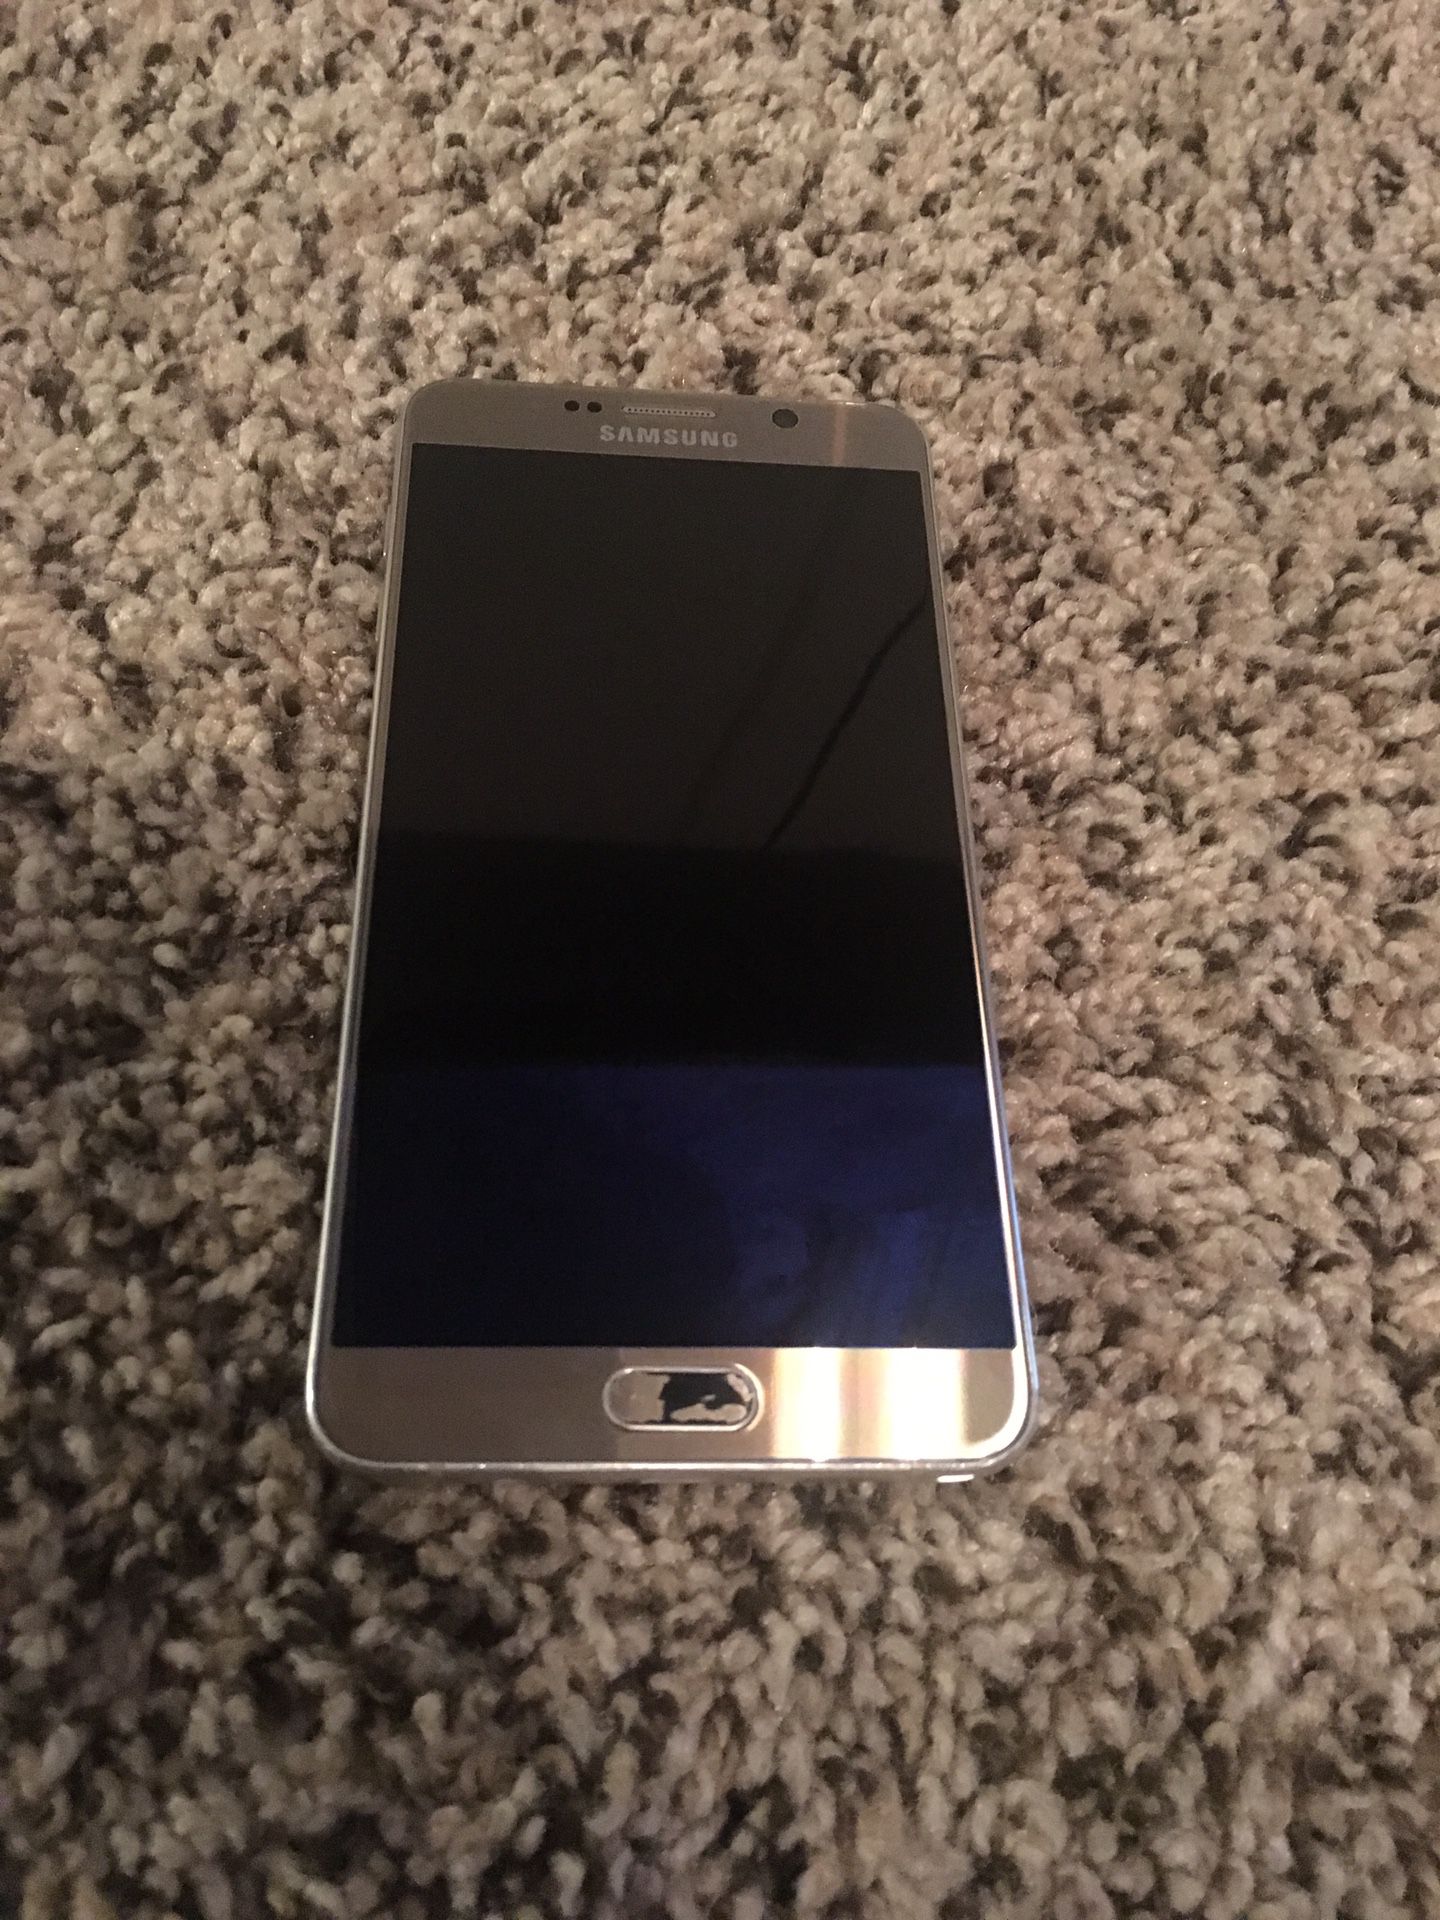 Samsung Galaxy Note 5 for T-Mobile or Metro PCS